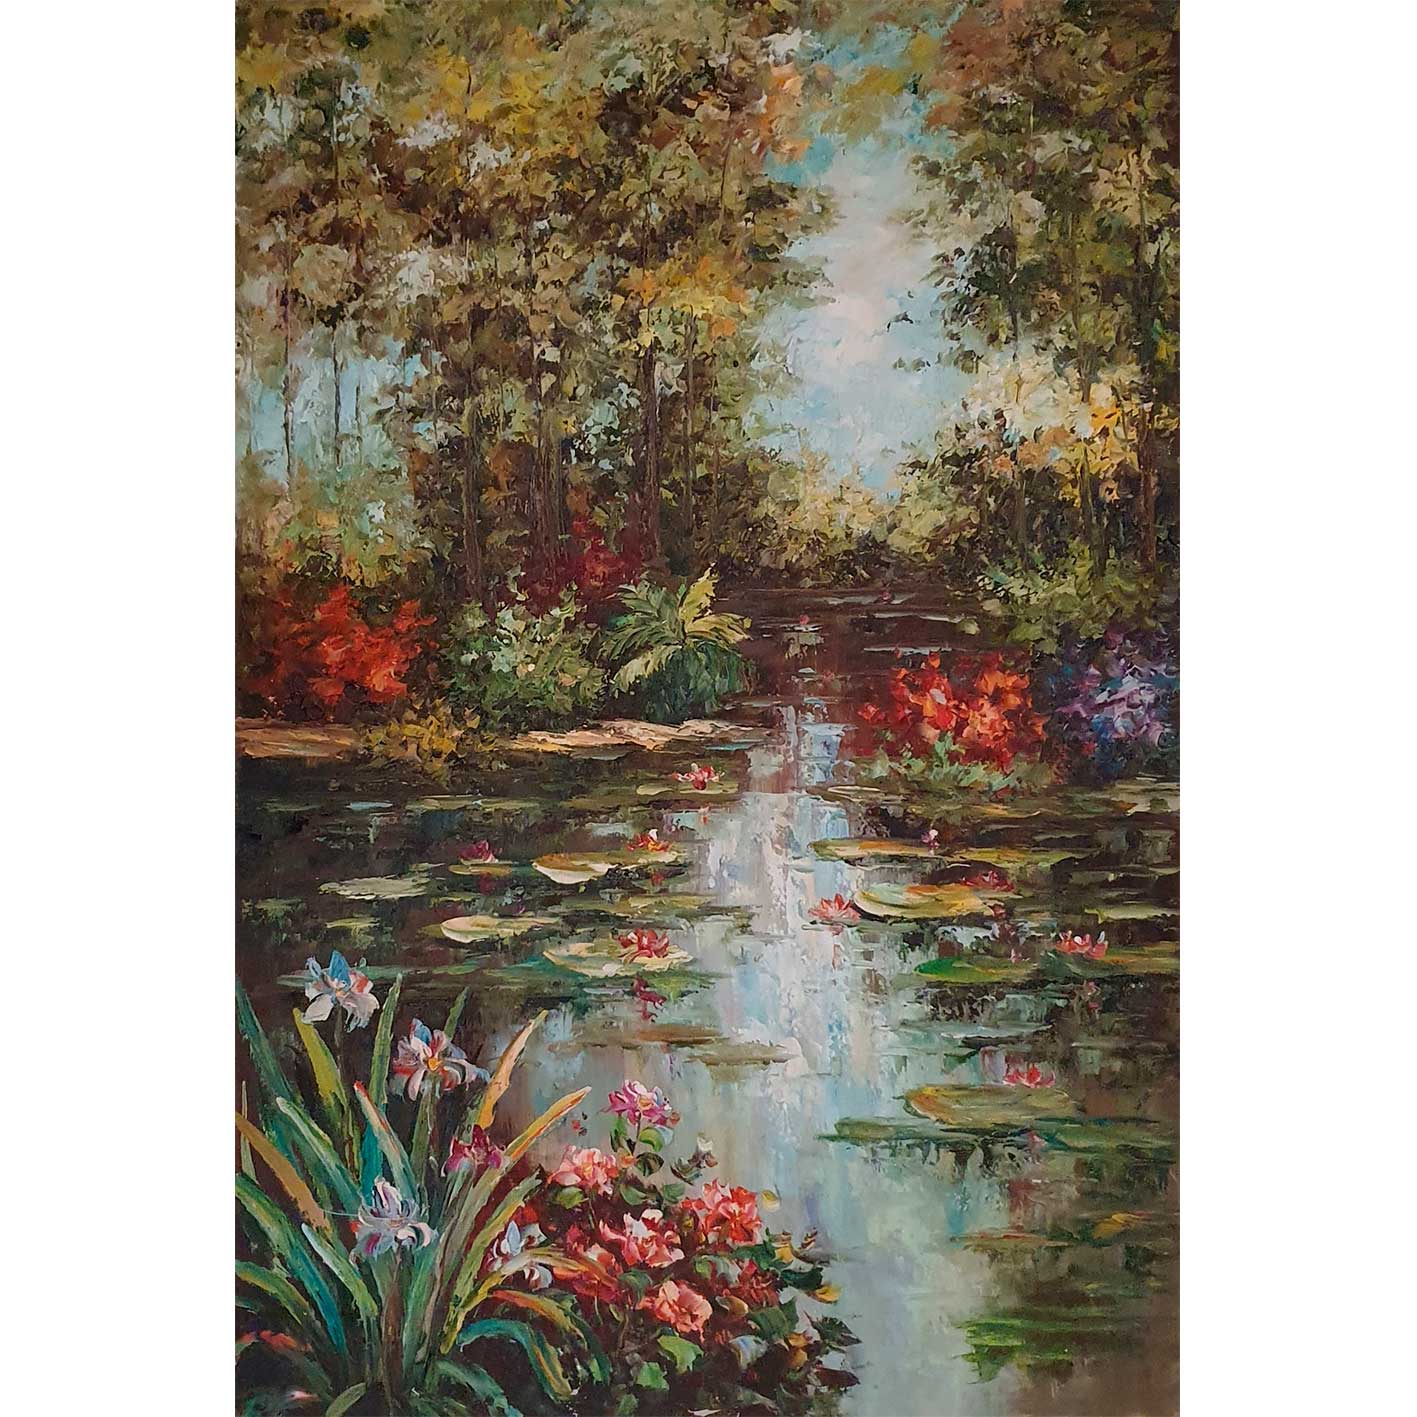 Spatula Water Lilies Painting 60x90 cm